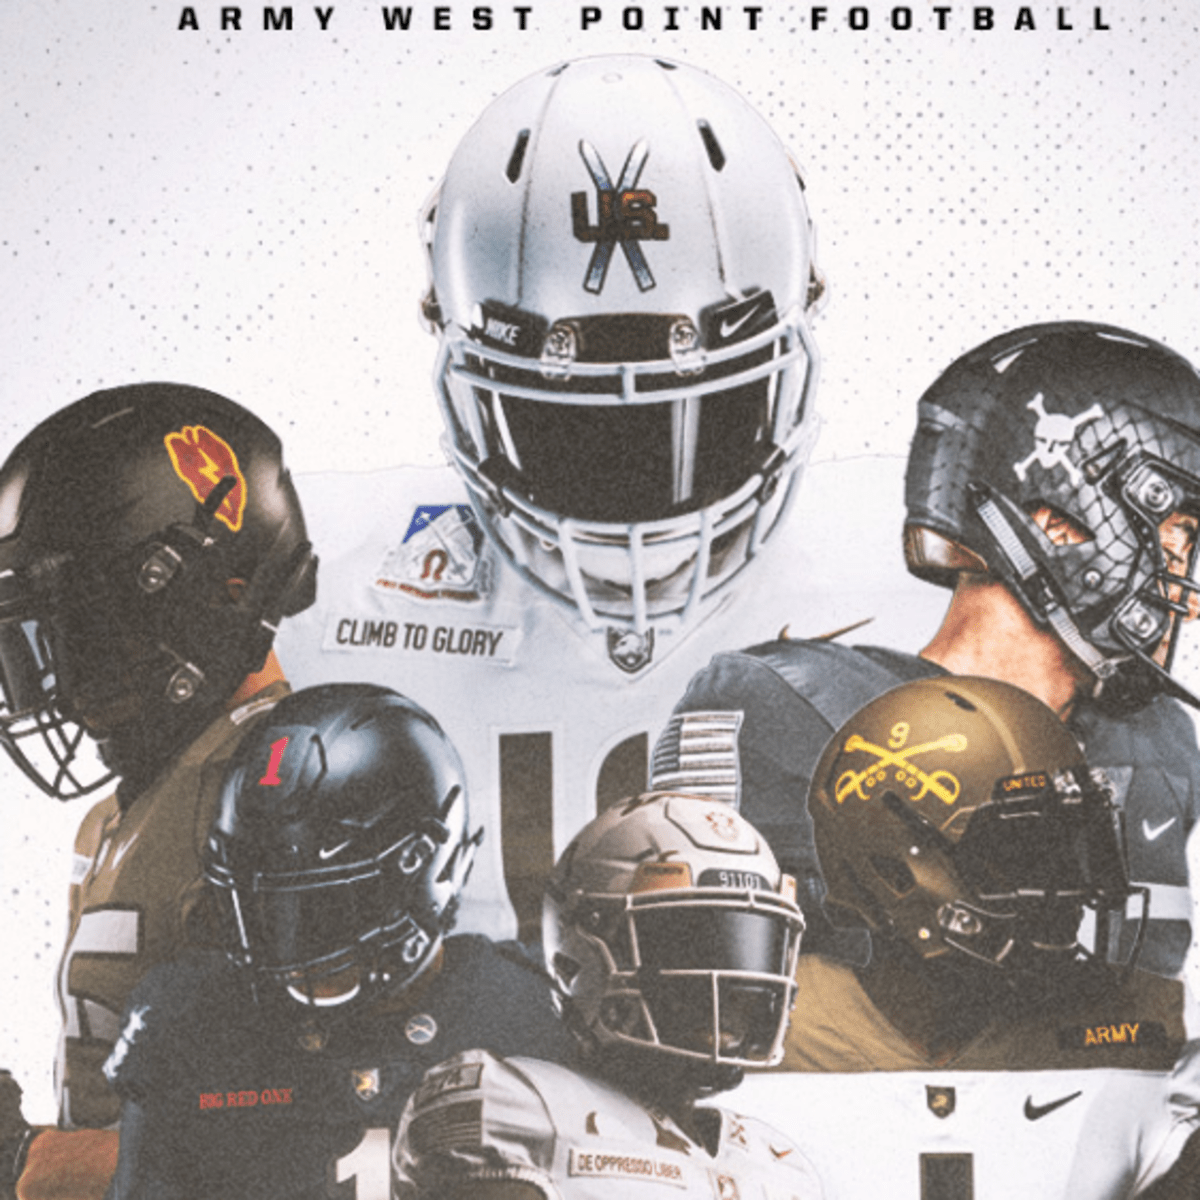 Naval Academy unveils new uniform for Army-Navy game